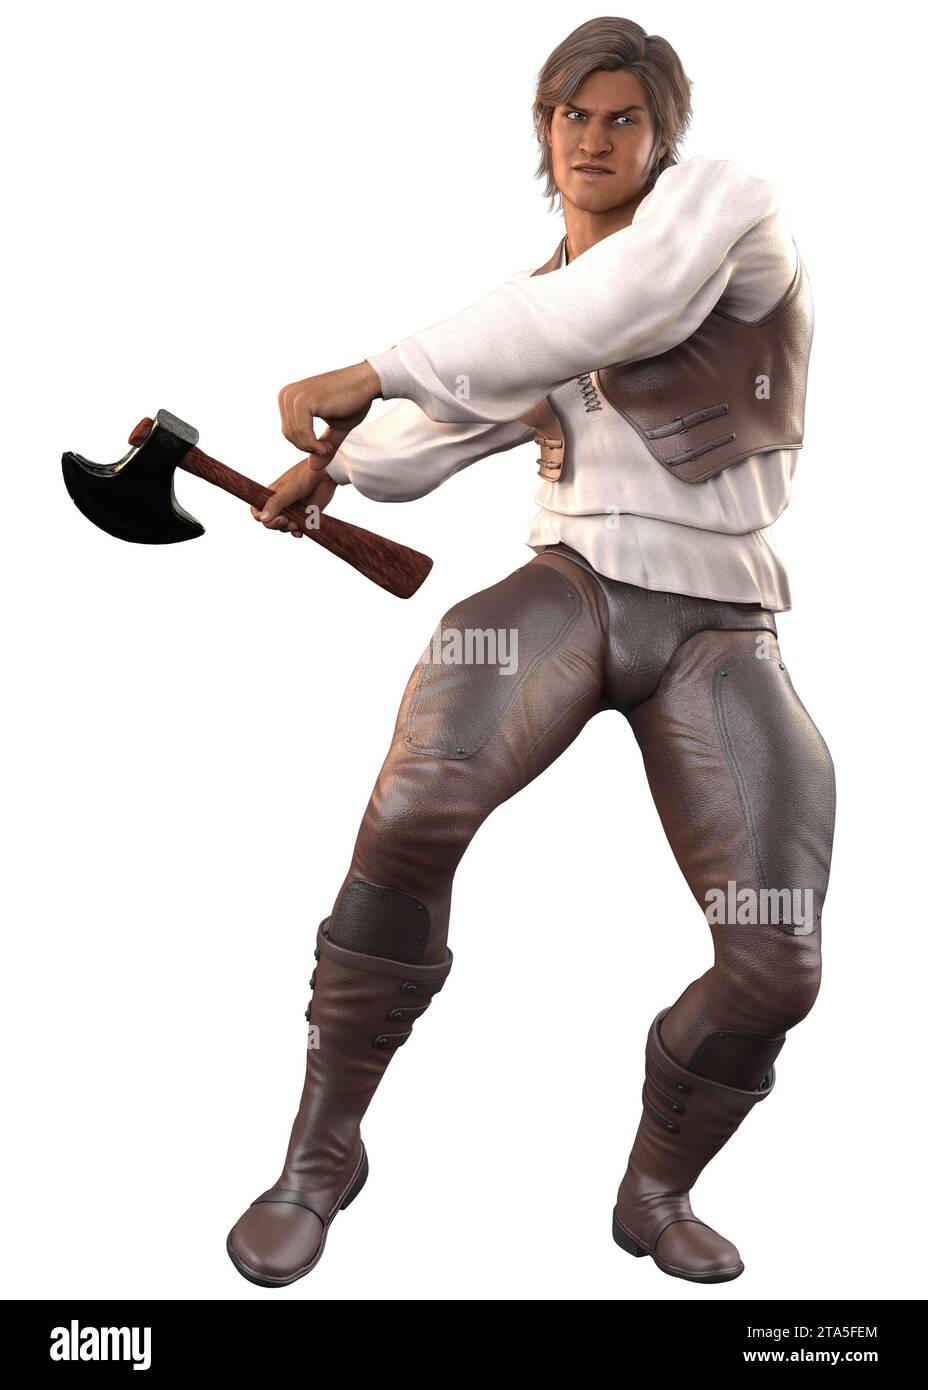 Man wears medieval lumberjack outfit with axe, 3D Illustration. Stock Photo